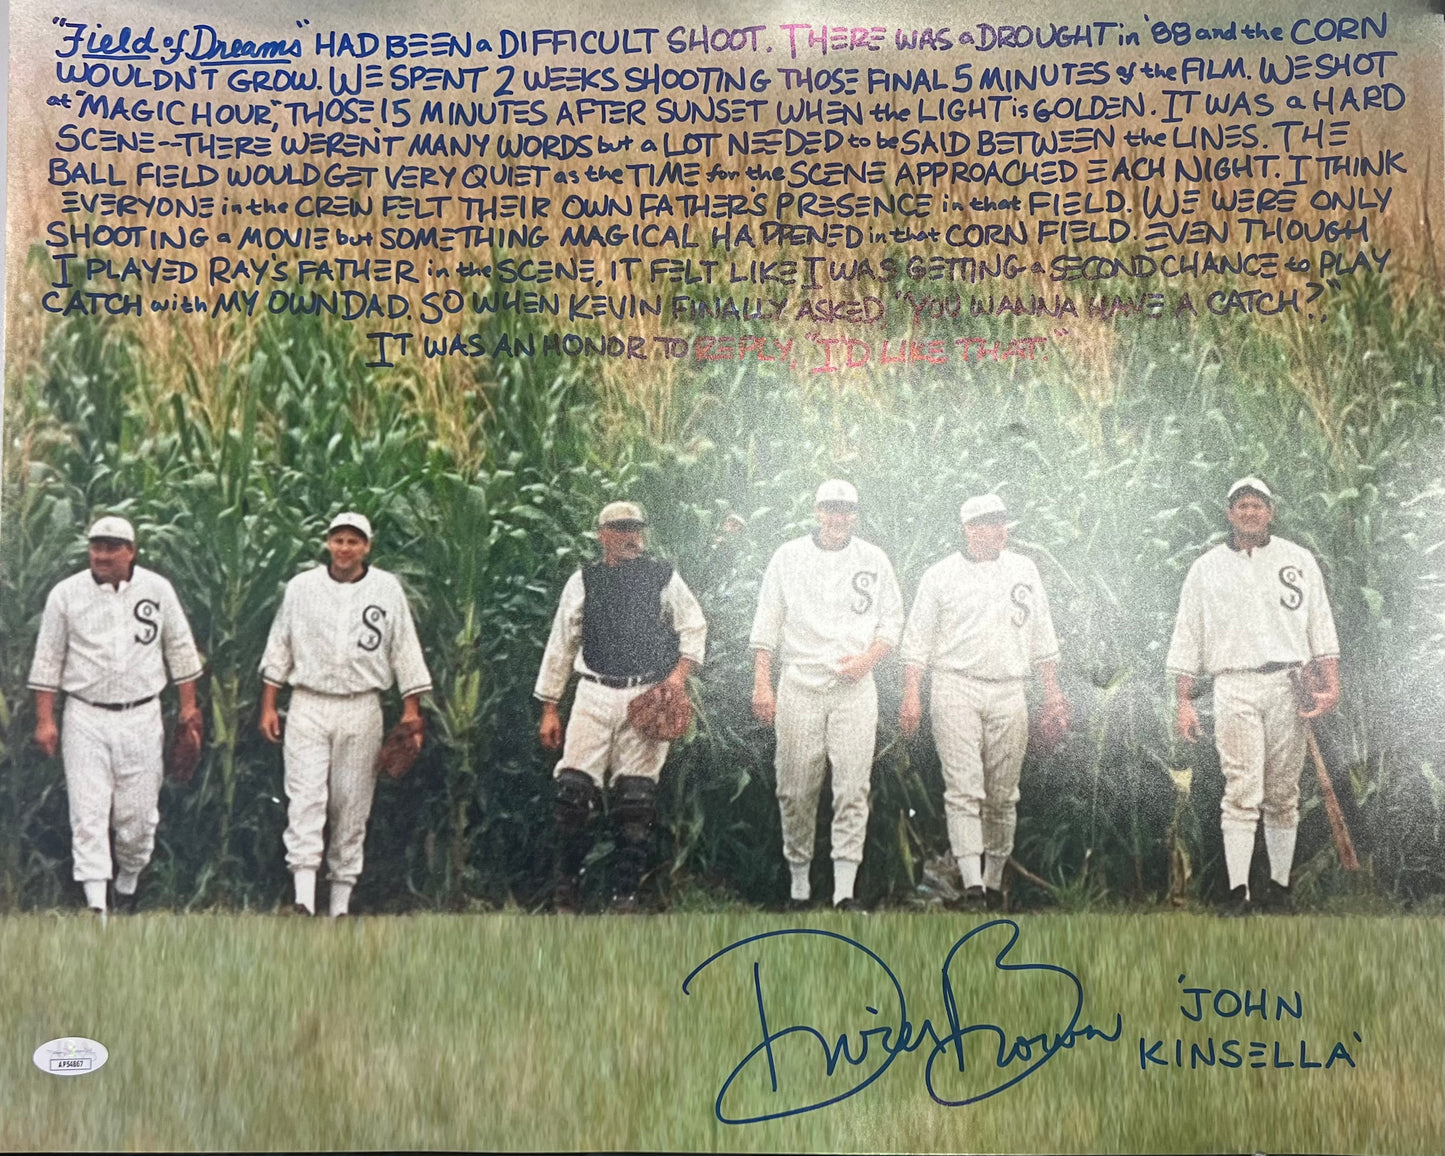 Field of Dreams Dwier Brown Signed/Inscribed 16x20 with JSA COA